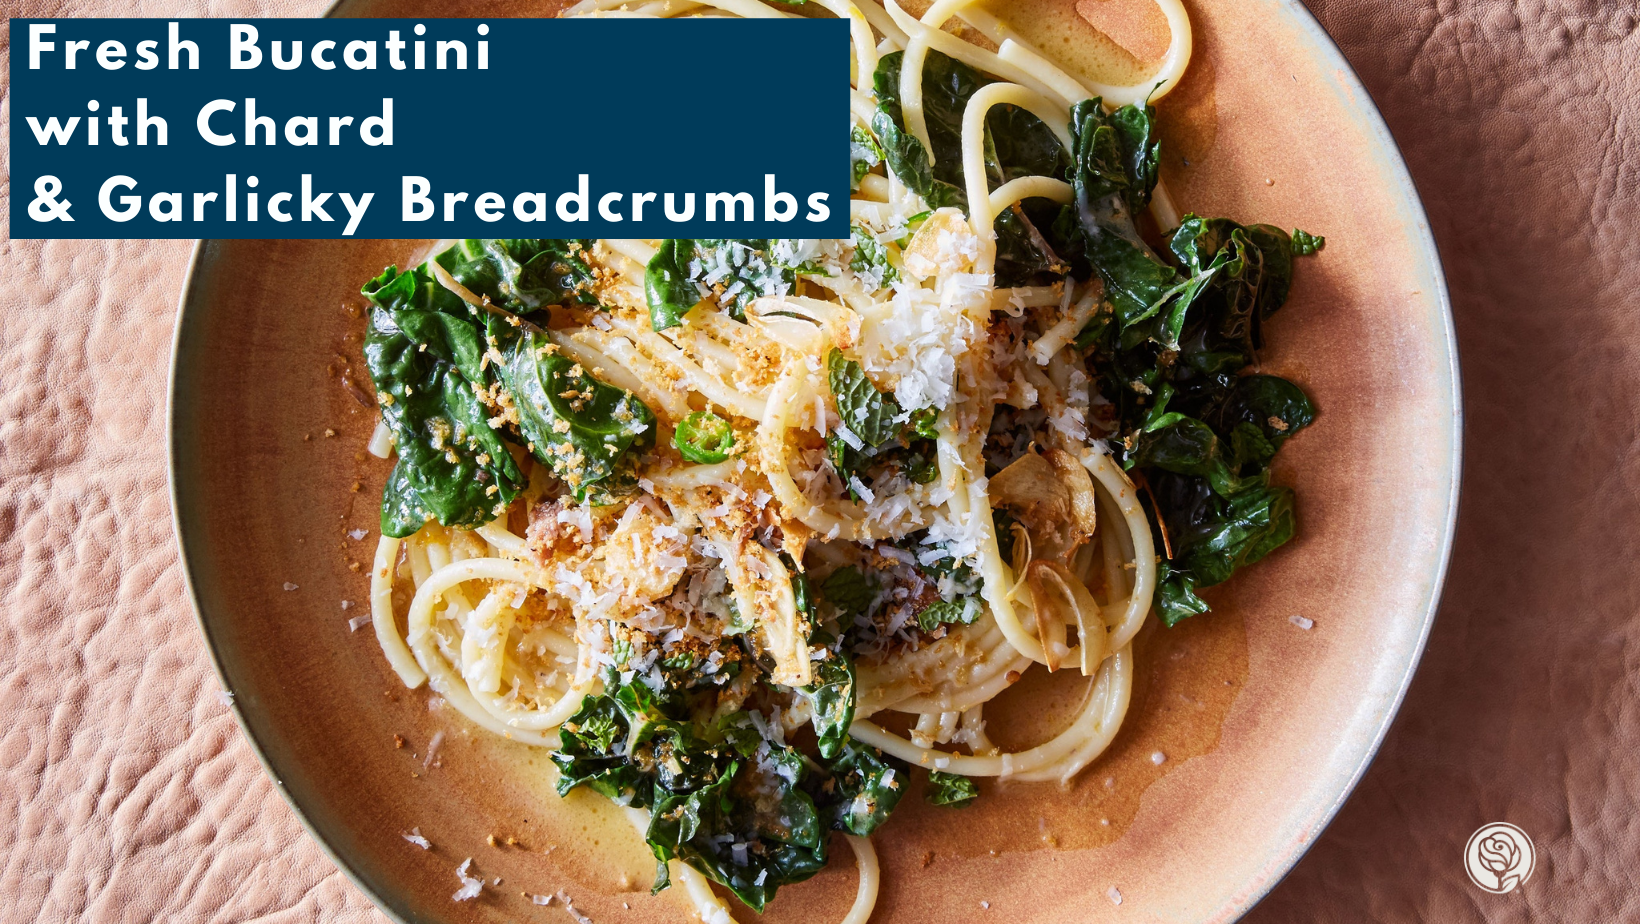 Fresh Bucatini with Chard and Garlicky Breadcrumbs